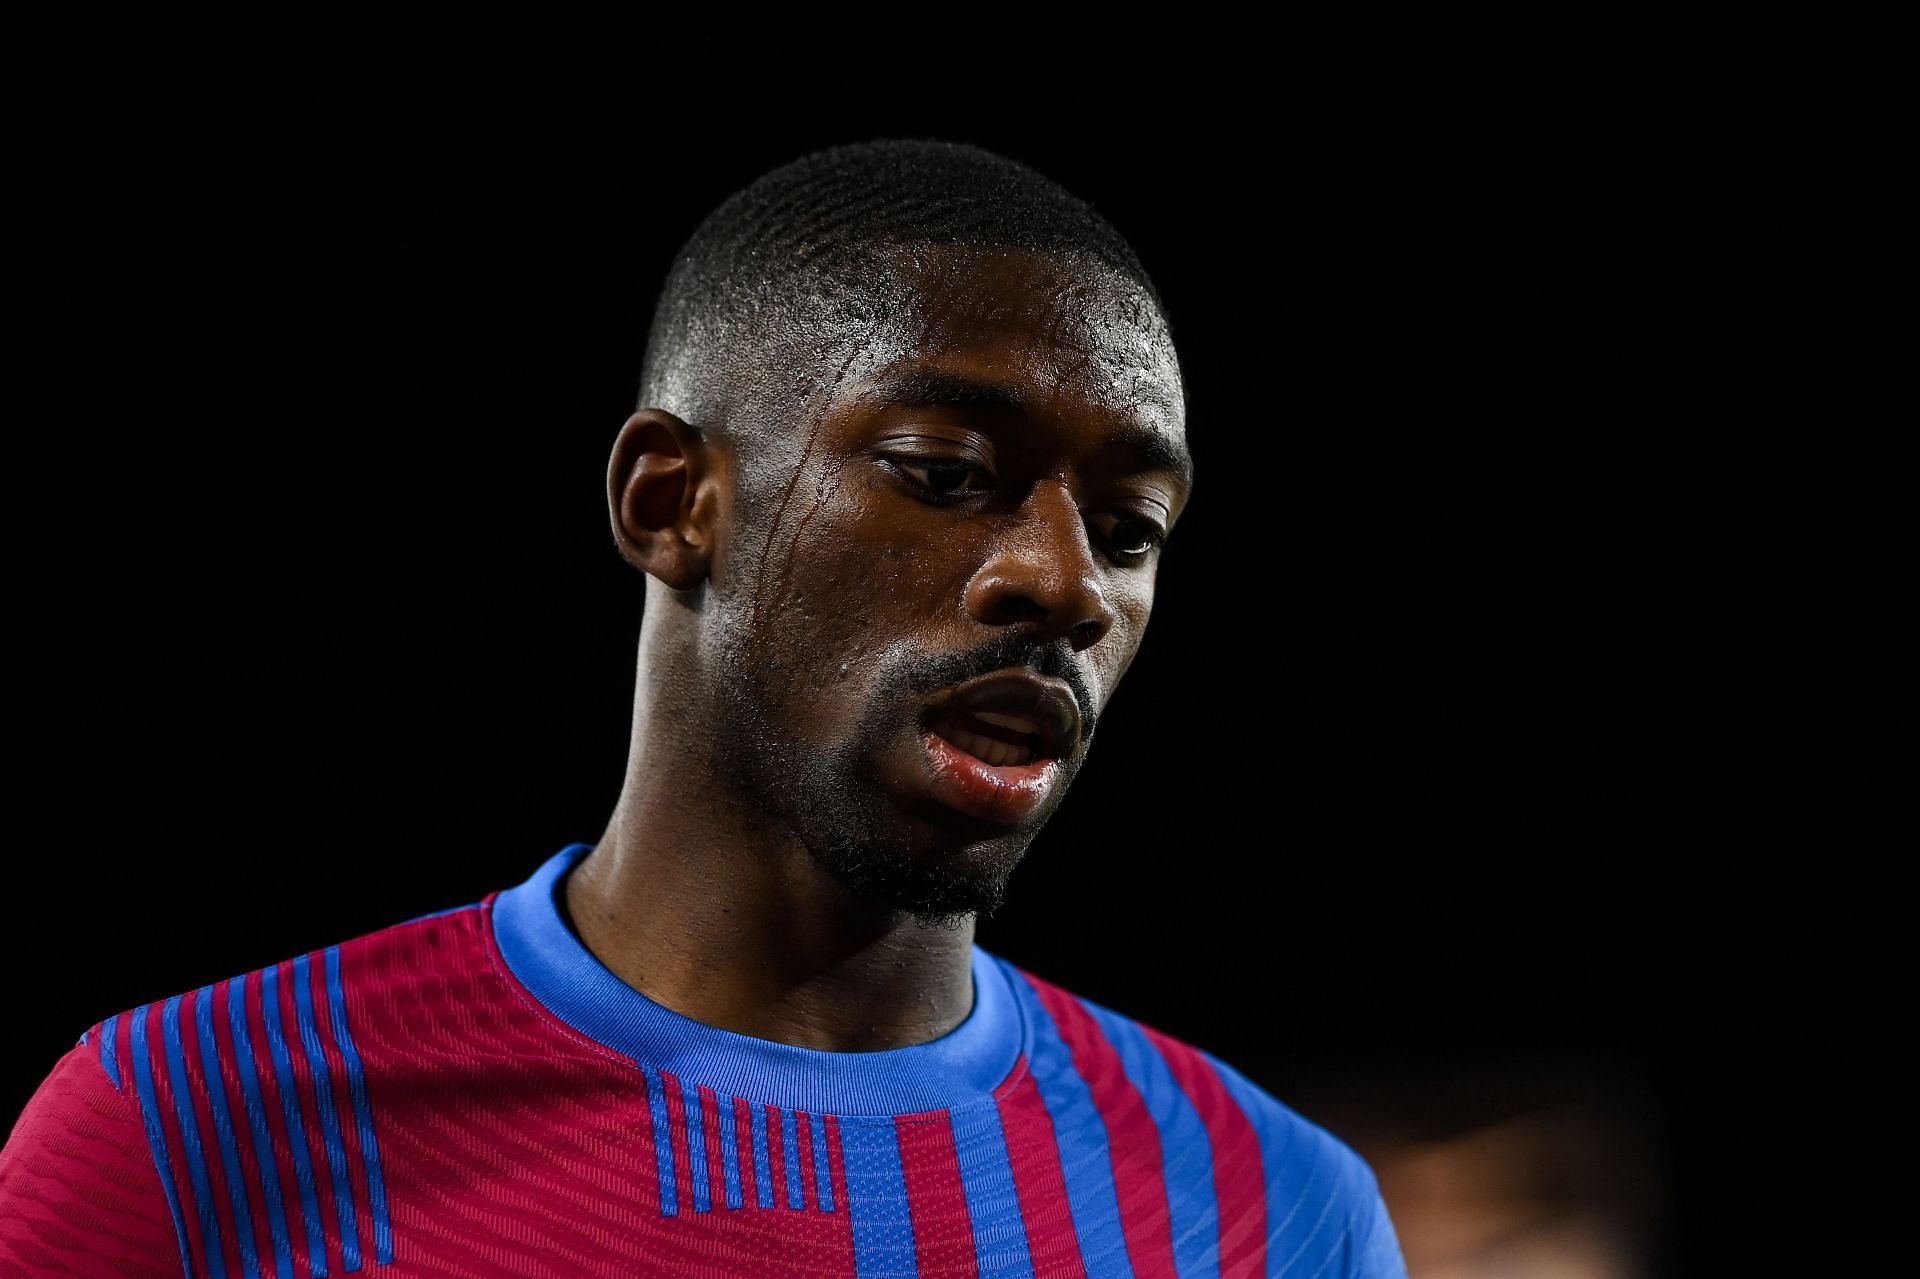 When he stays fit, Dembele shows his class